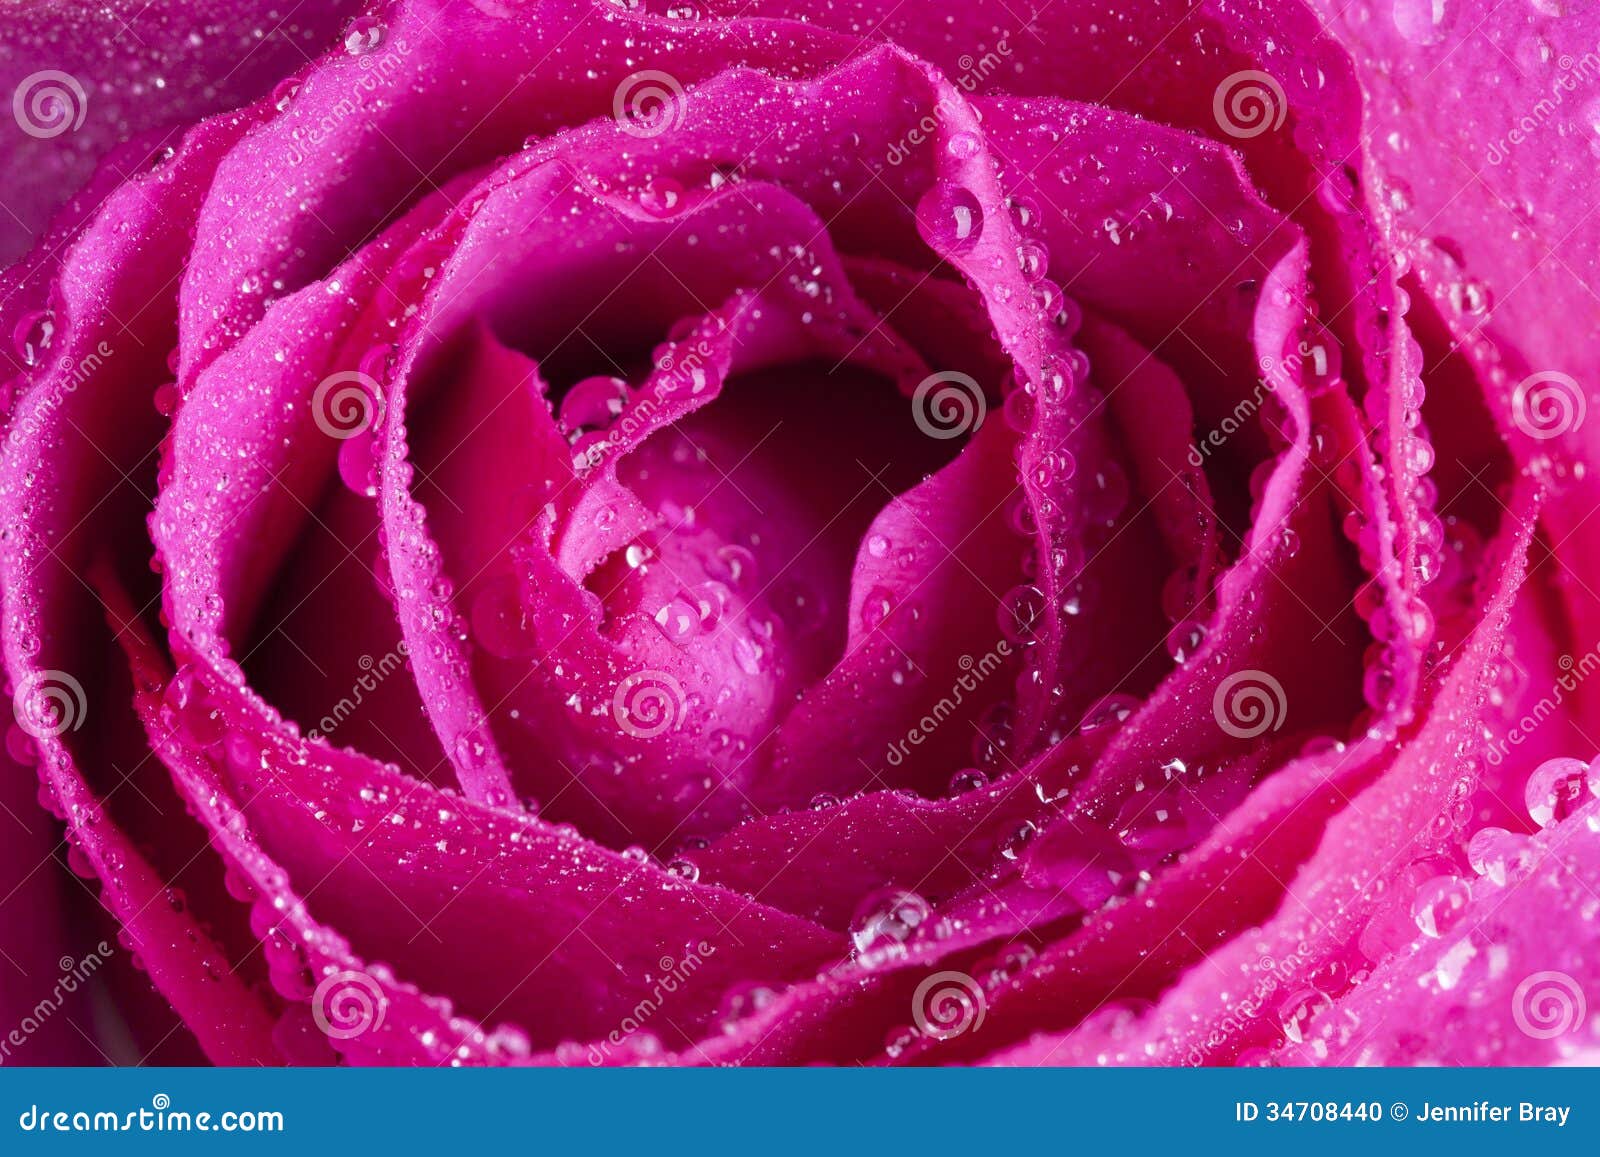 Pink Rose With Water Drops And Stem